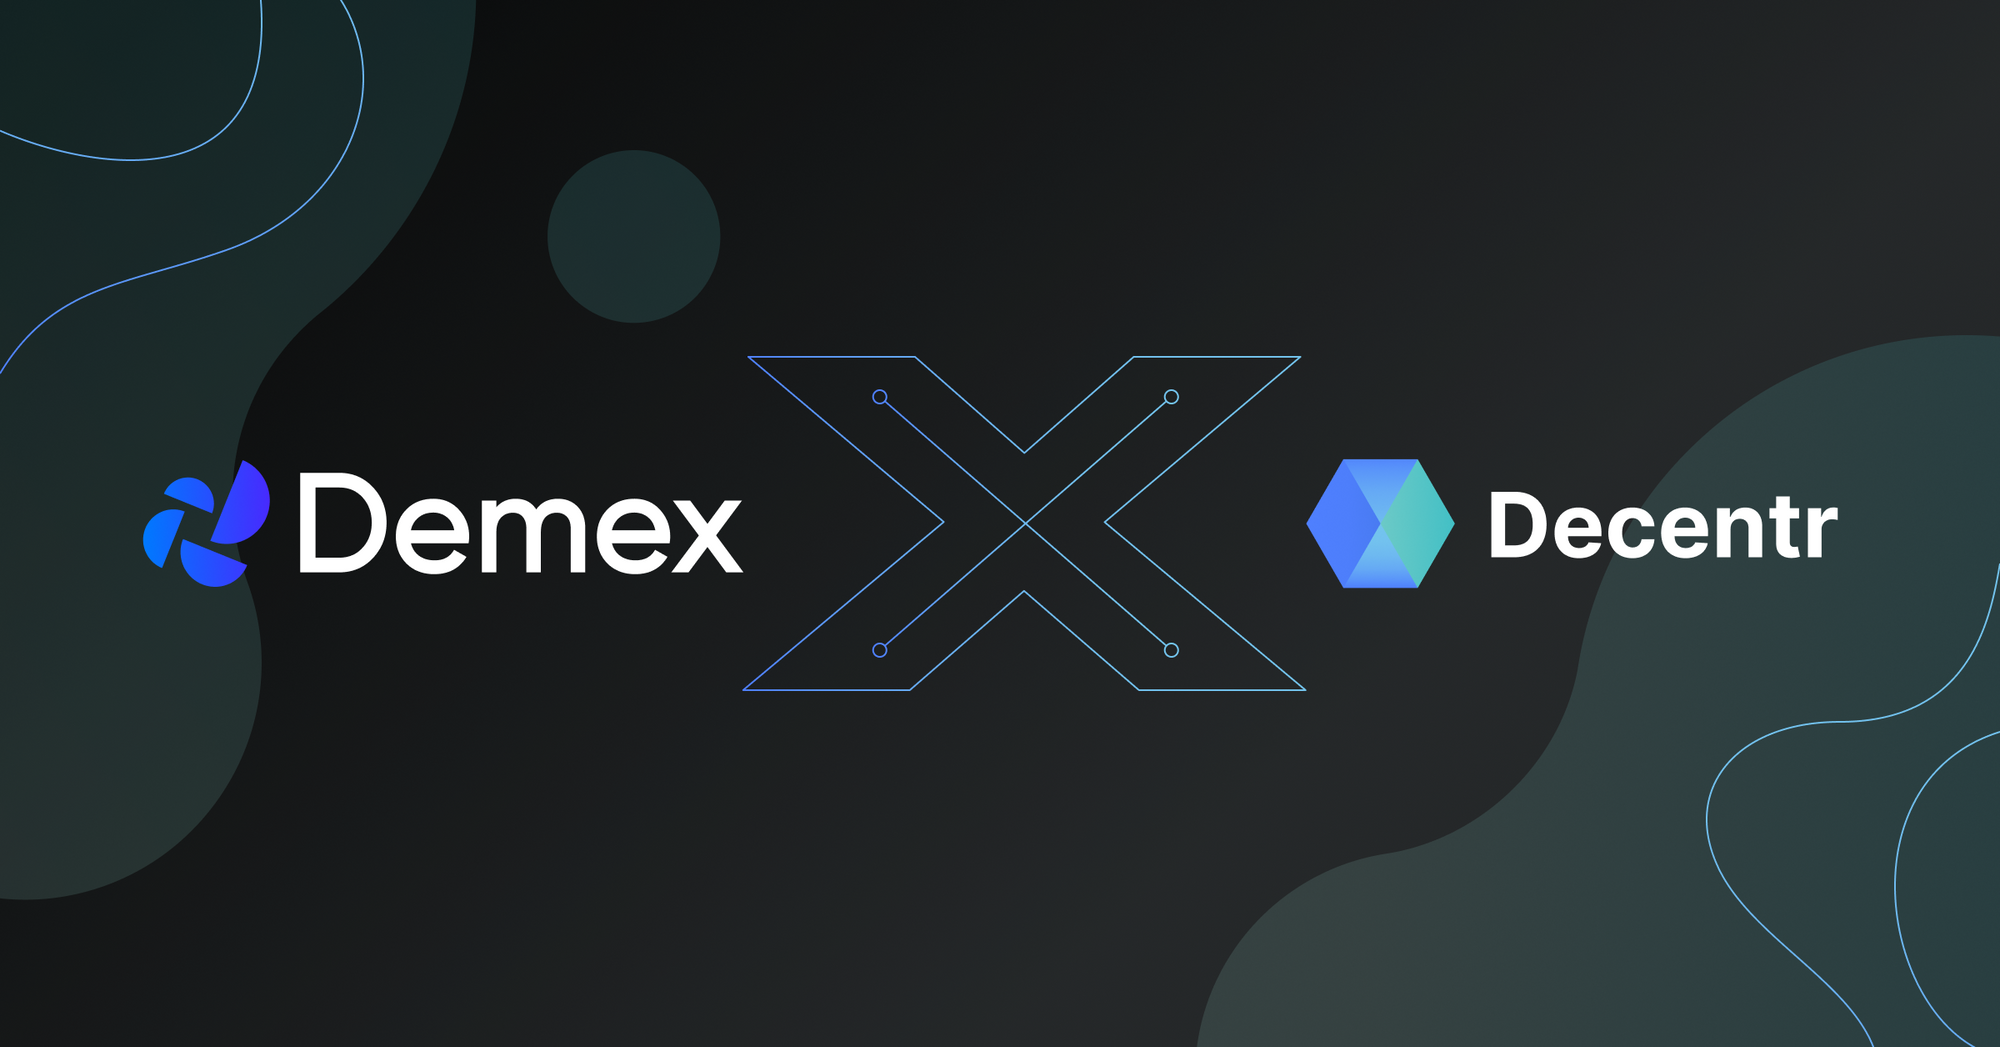 Demex Integrates with Decentr, a Web3 browser